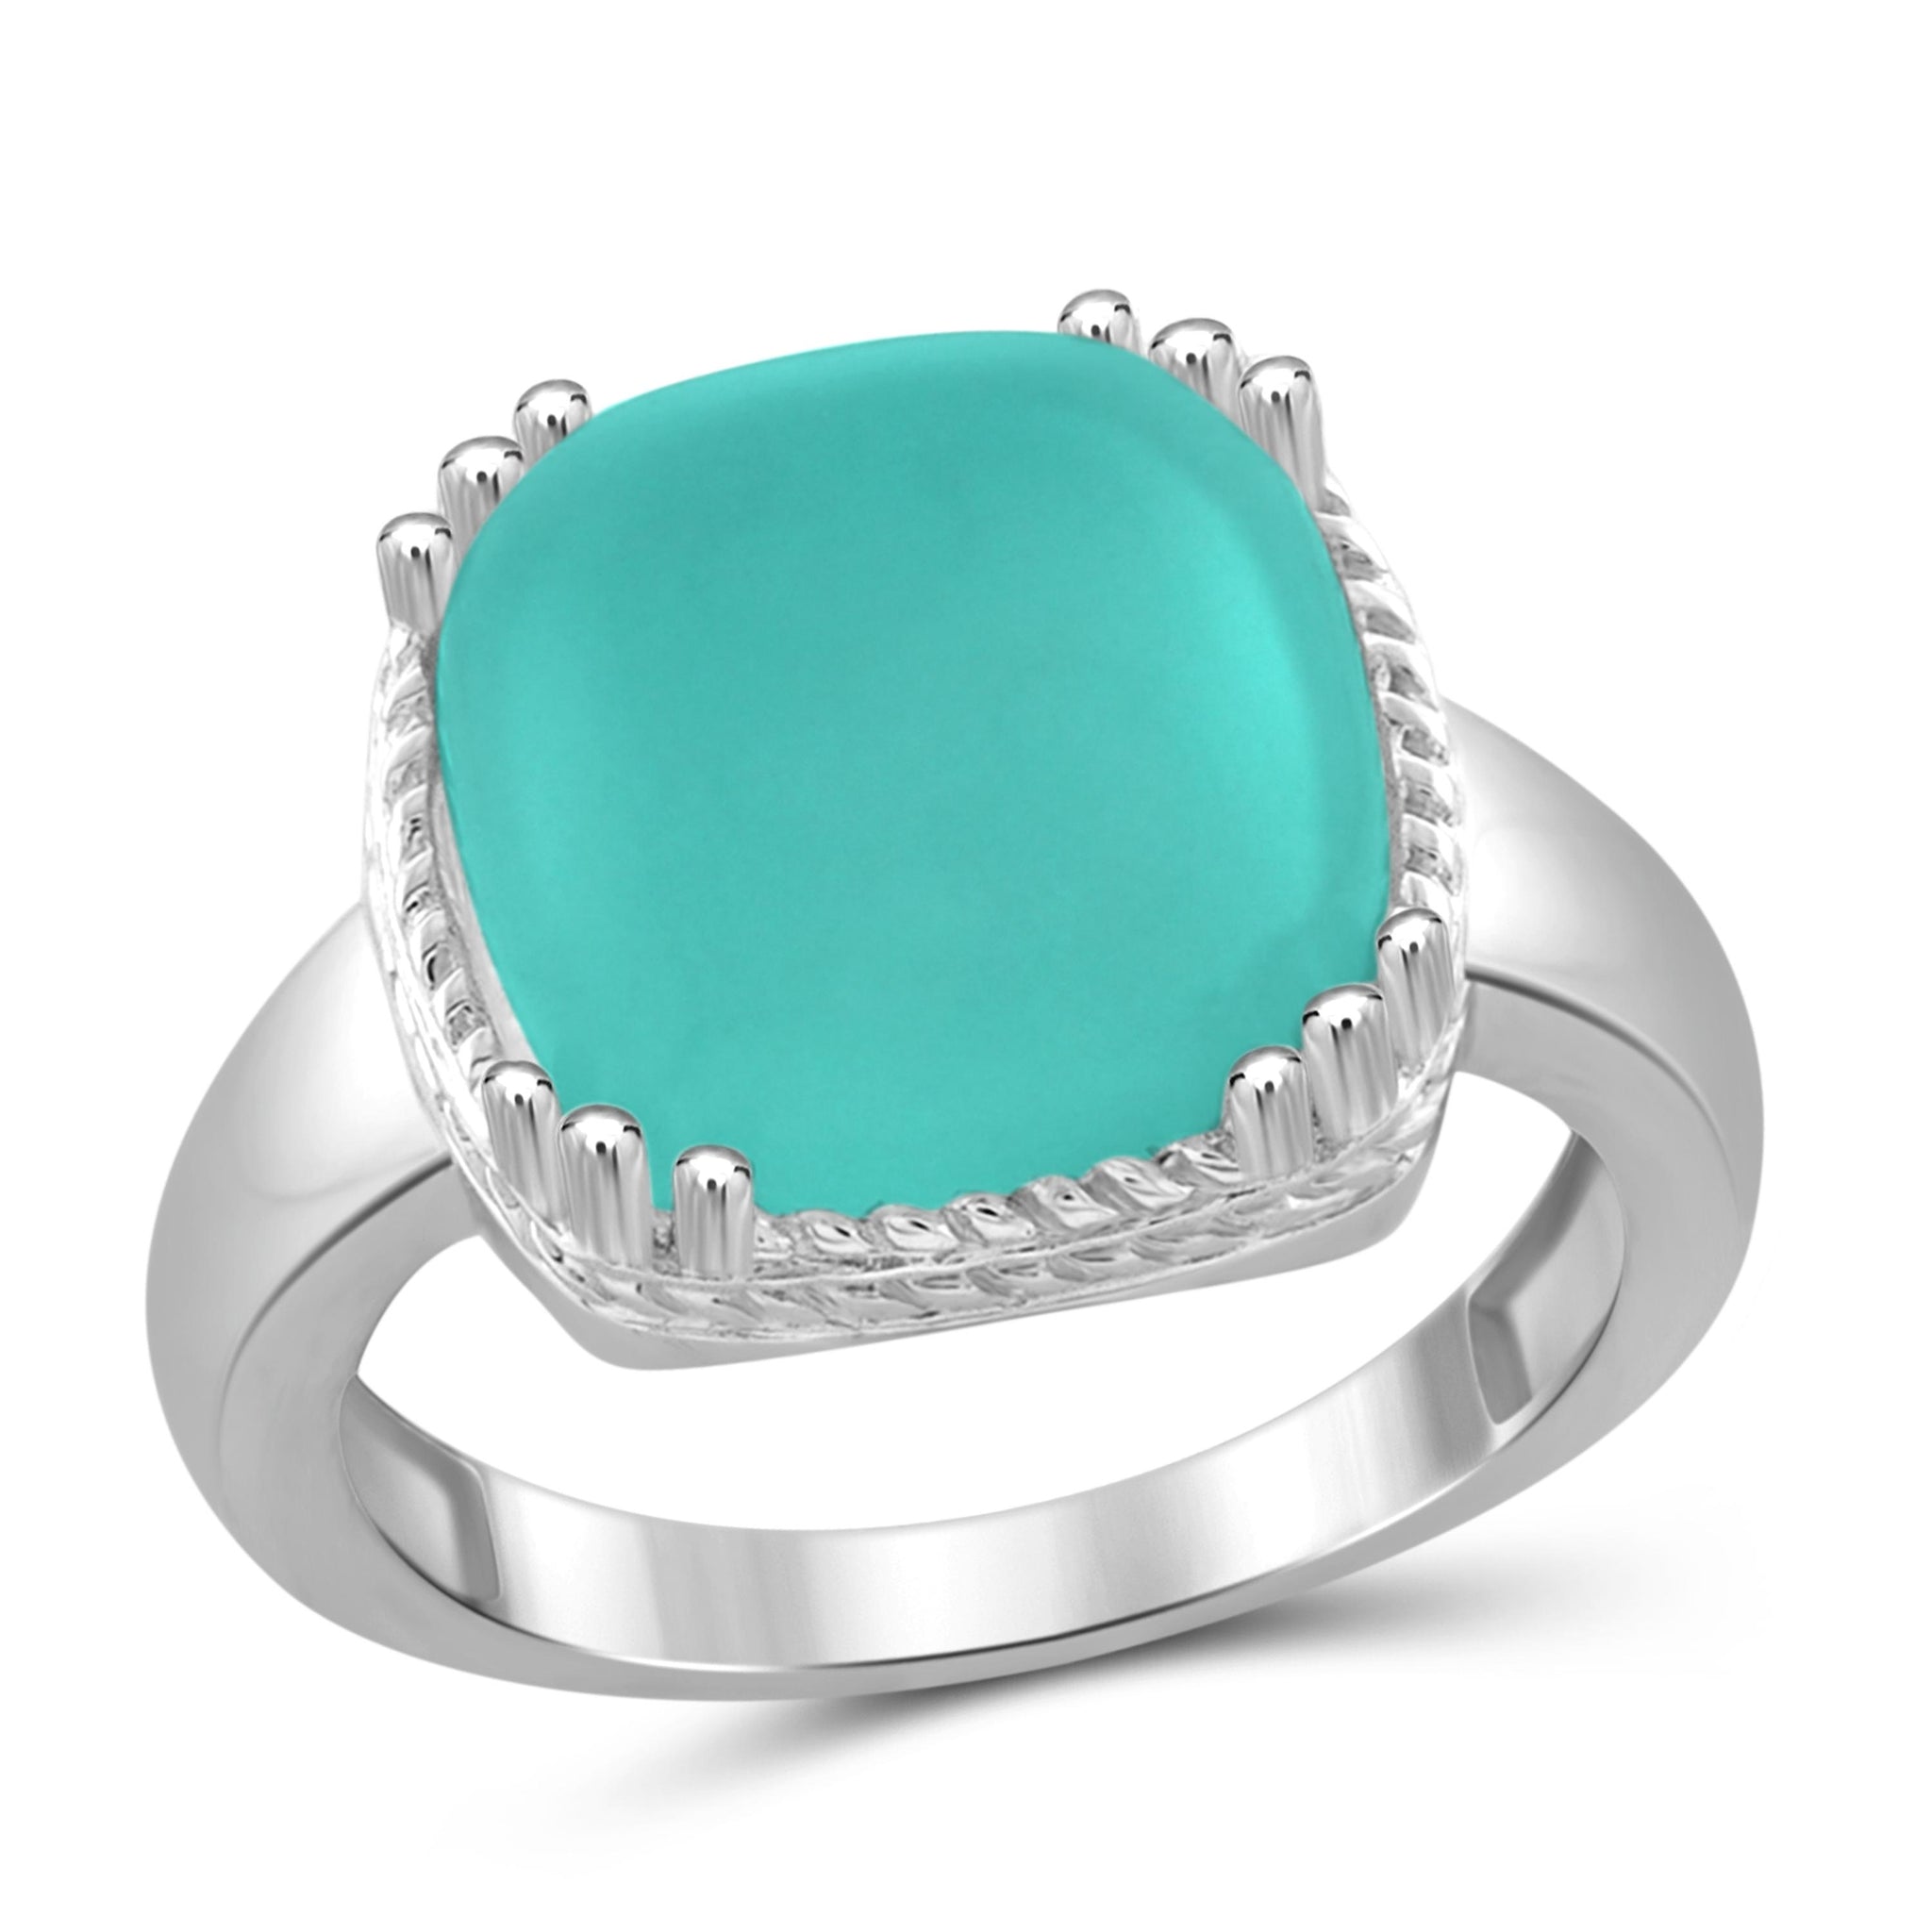 JewelonFire 6 3/4 Carat T.G.W. Chalcedony Sterling Silver Fashion Ring